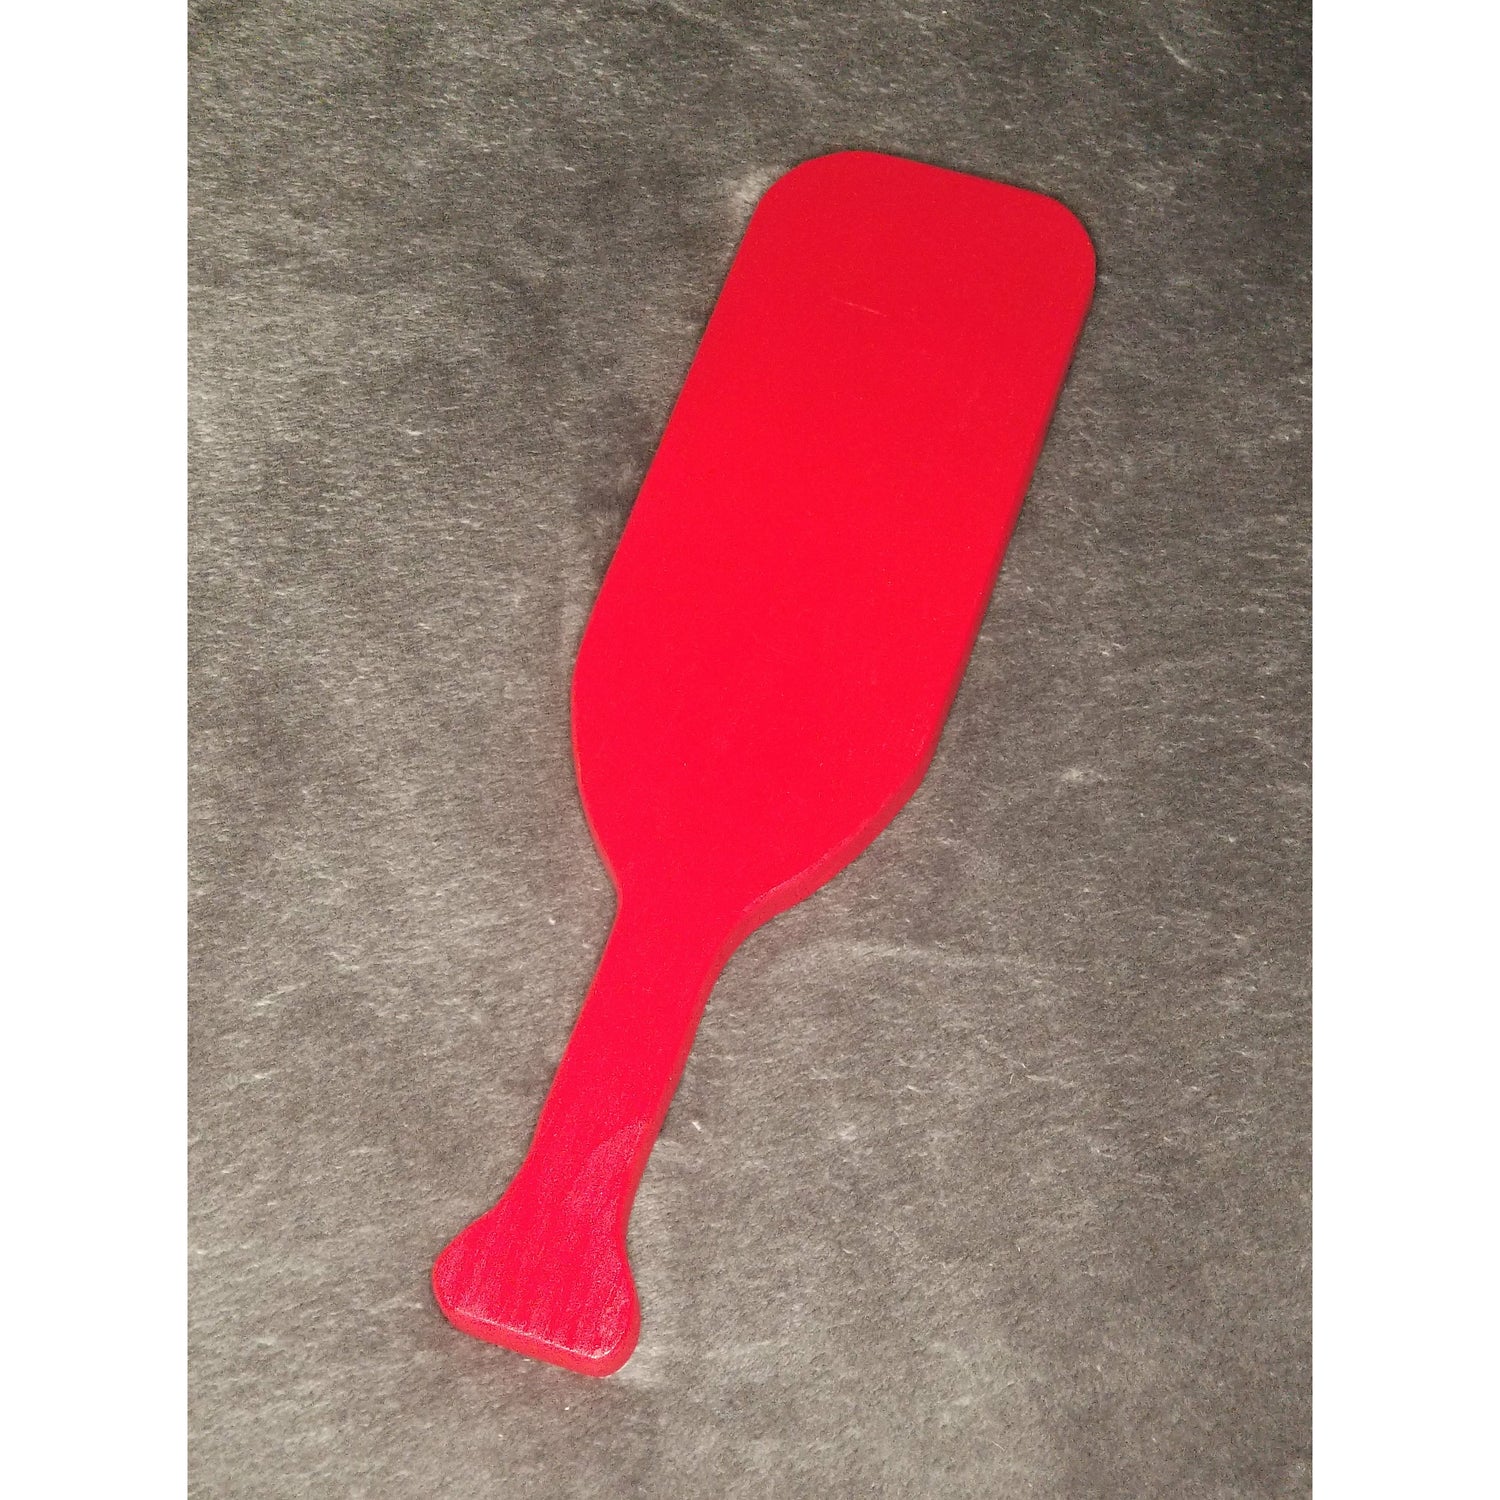 Spanking Paddle Solid no Holes, Wood Solid Spanking Paddle without Hol –  PleasureFactorys